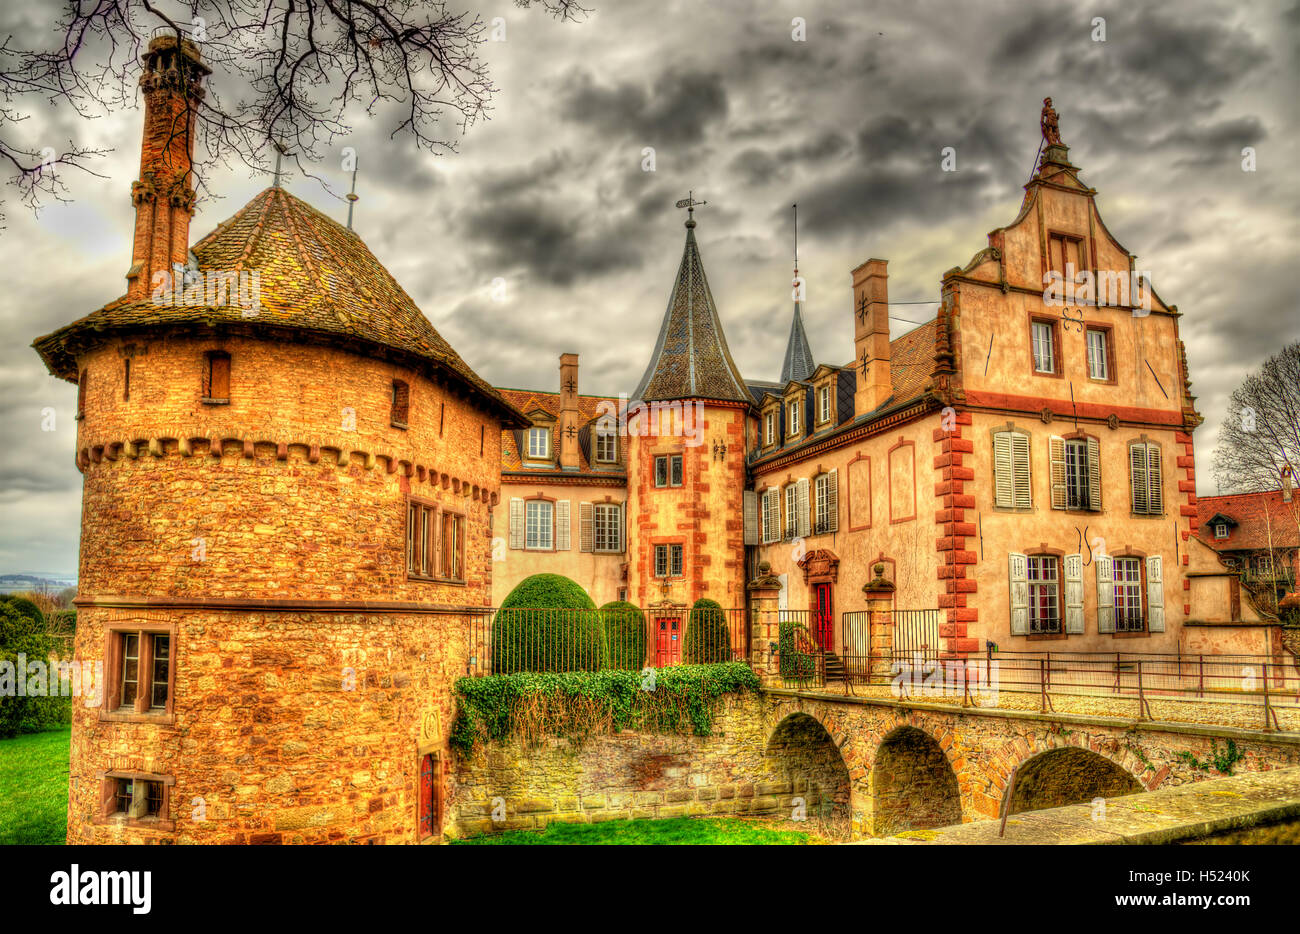 The Chateau d'Osthoffen, a medieval castle in Alsace, France Stock Photo